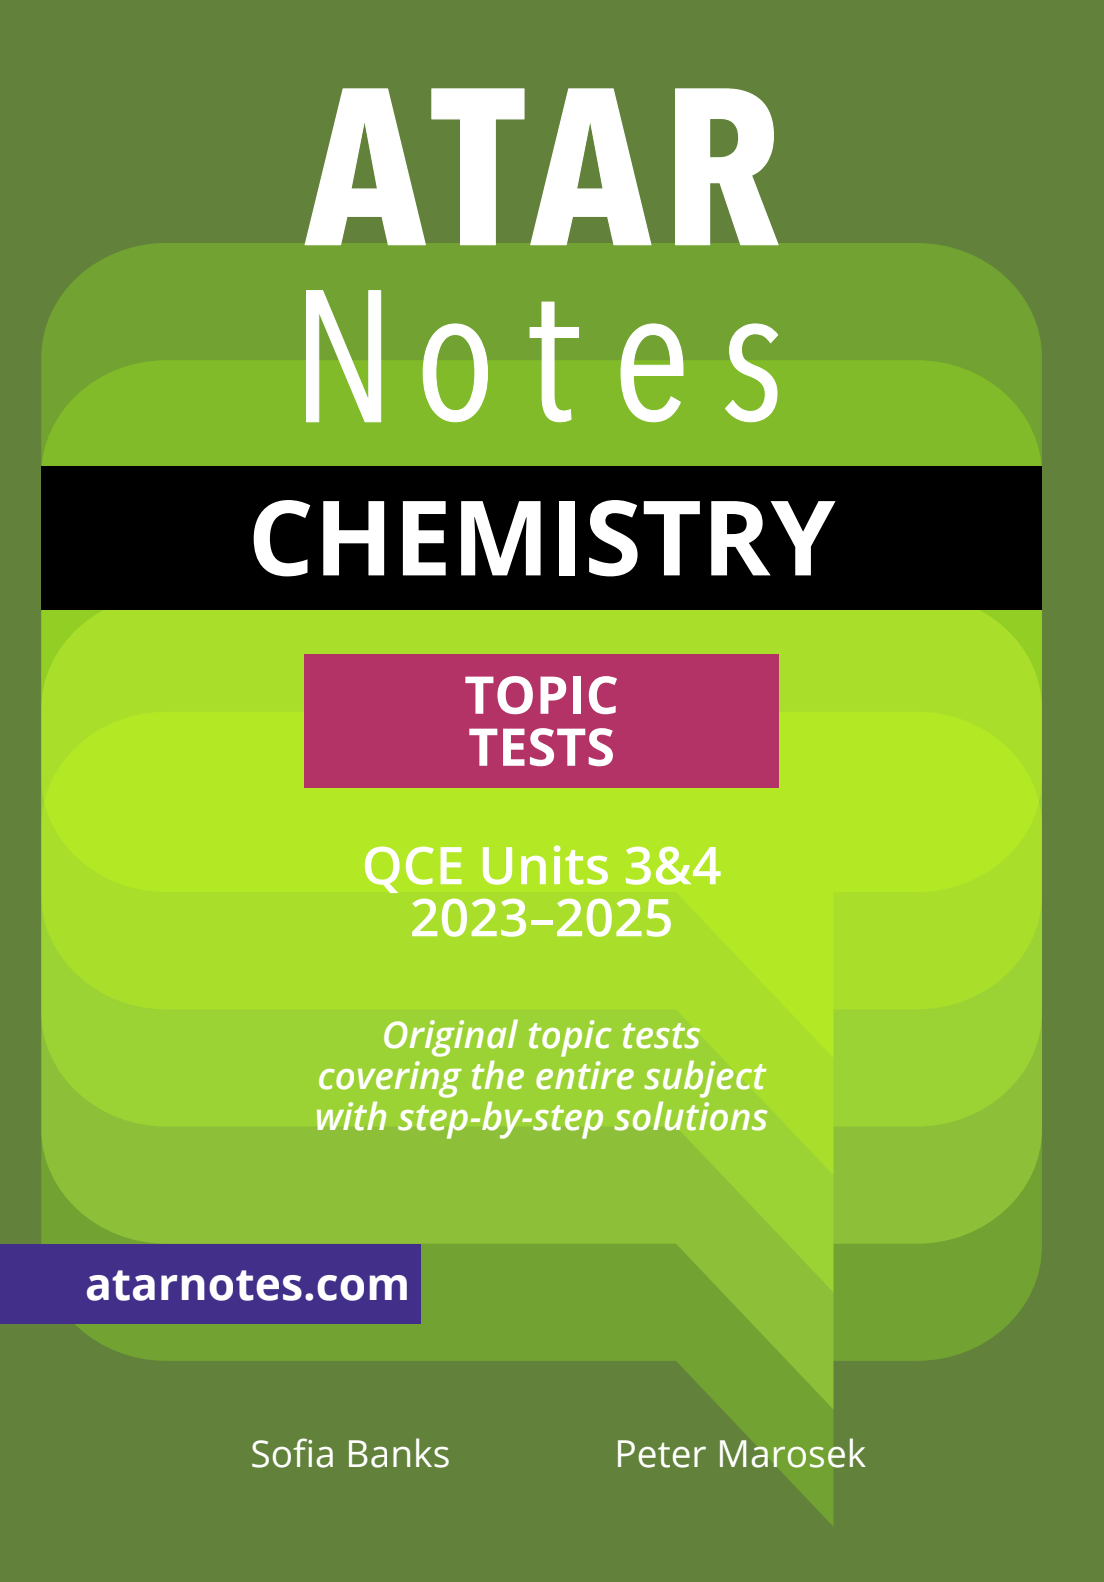 ATAR Notes QCE Chemistry 3&4 Topic Tests